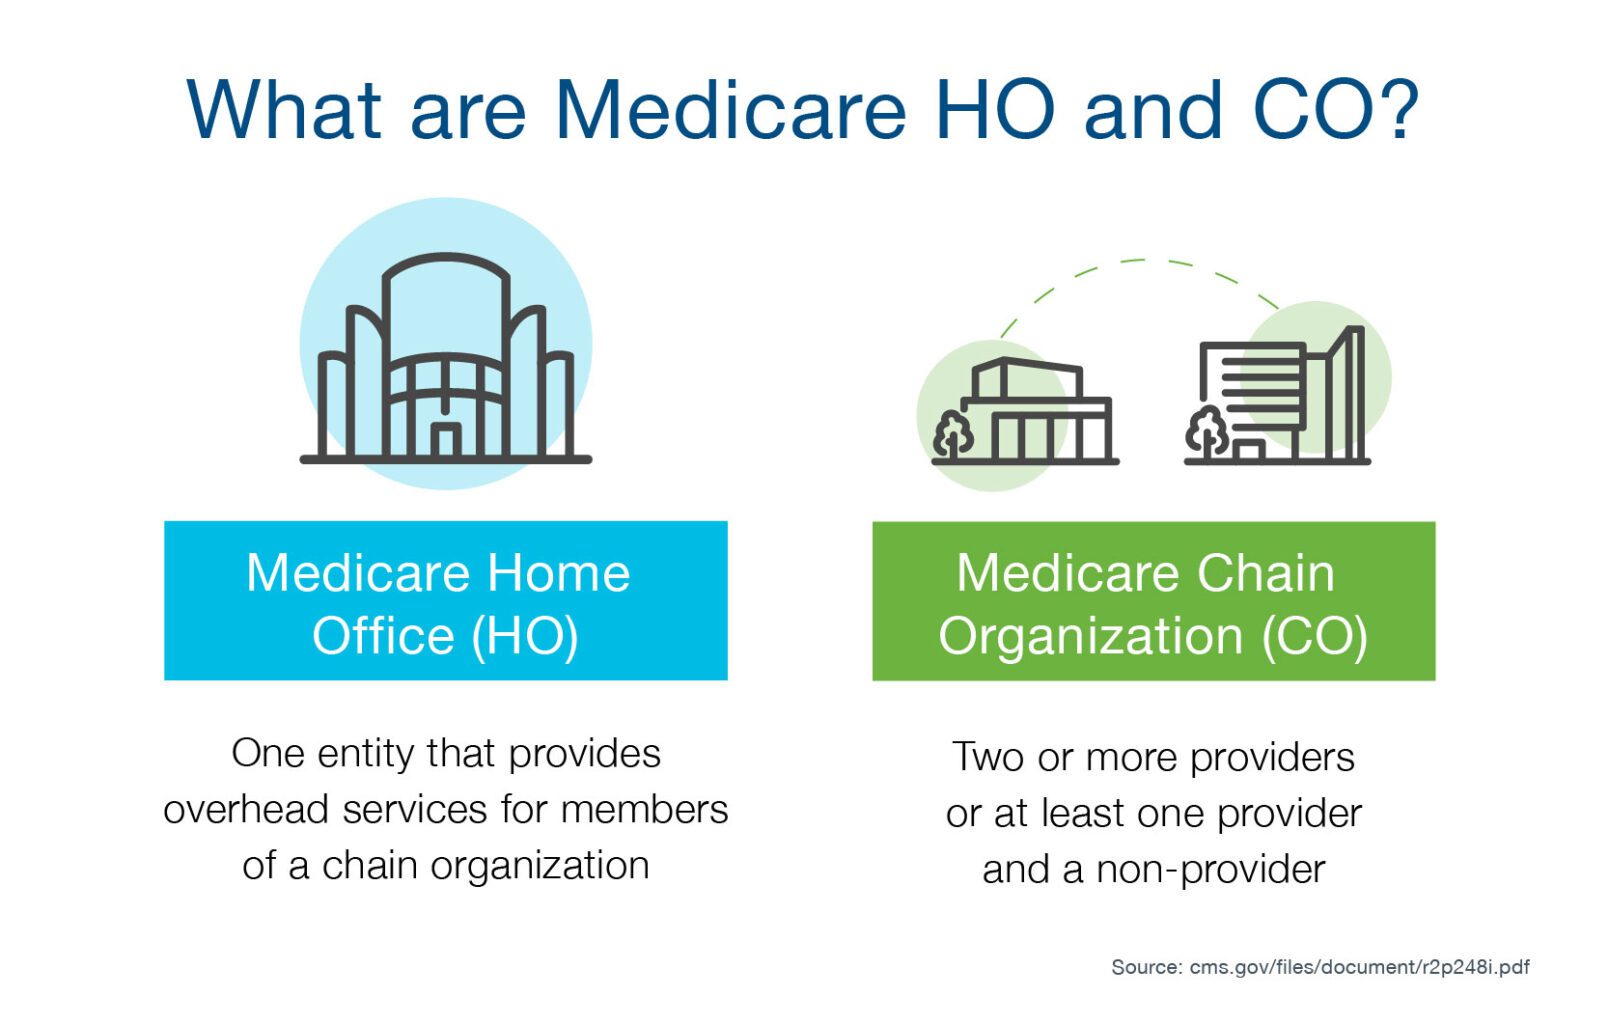 What are Medicare HO and CO?